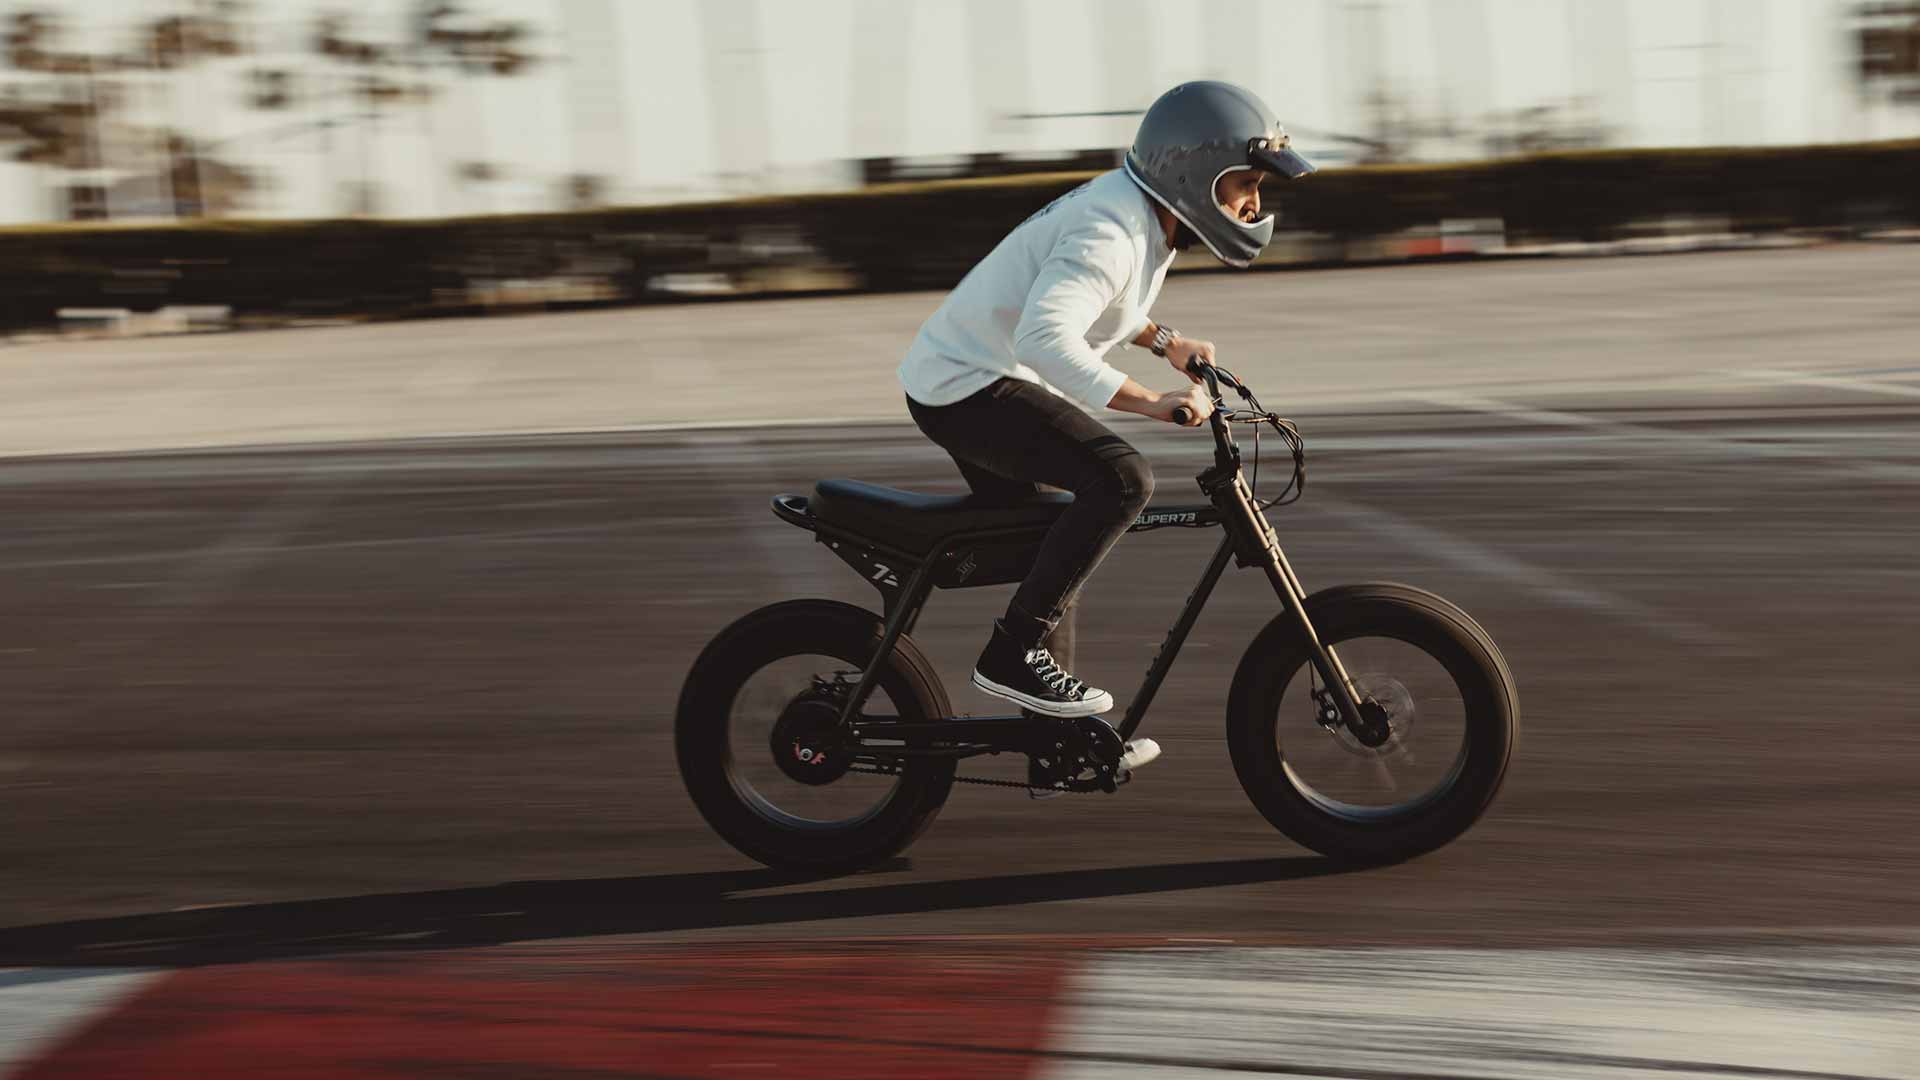 The Super73-ZX ebike throttling down the street with a rider in a helmet